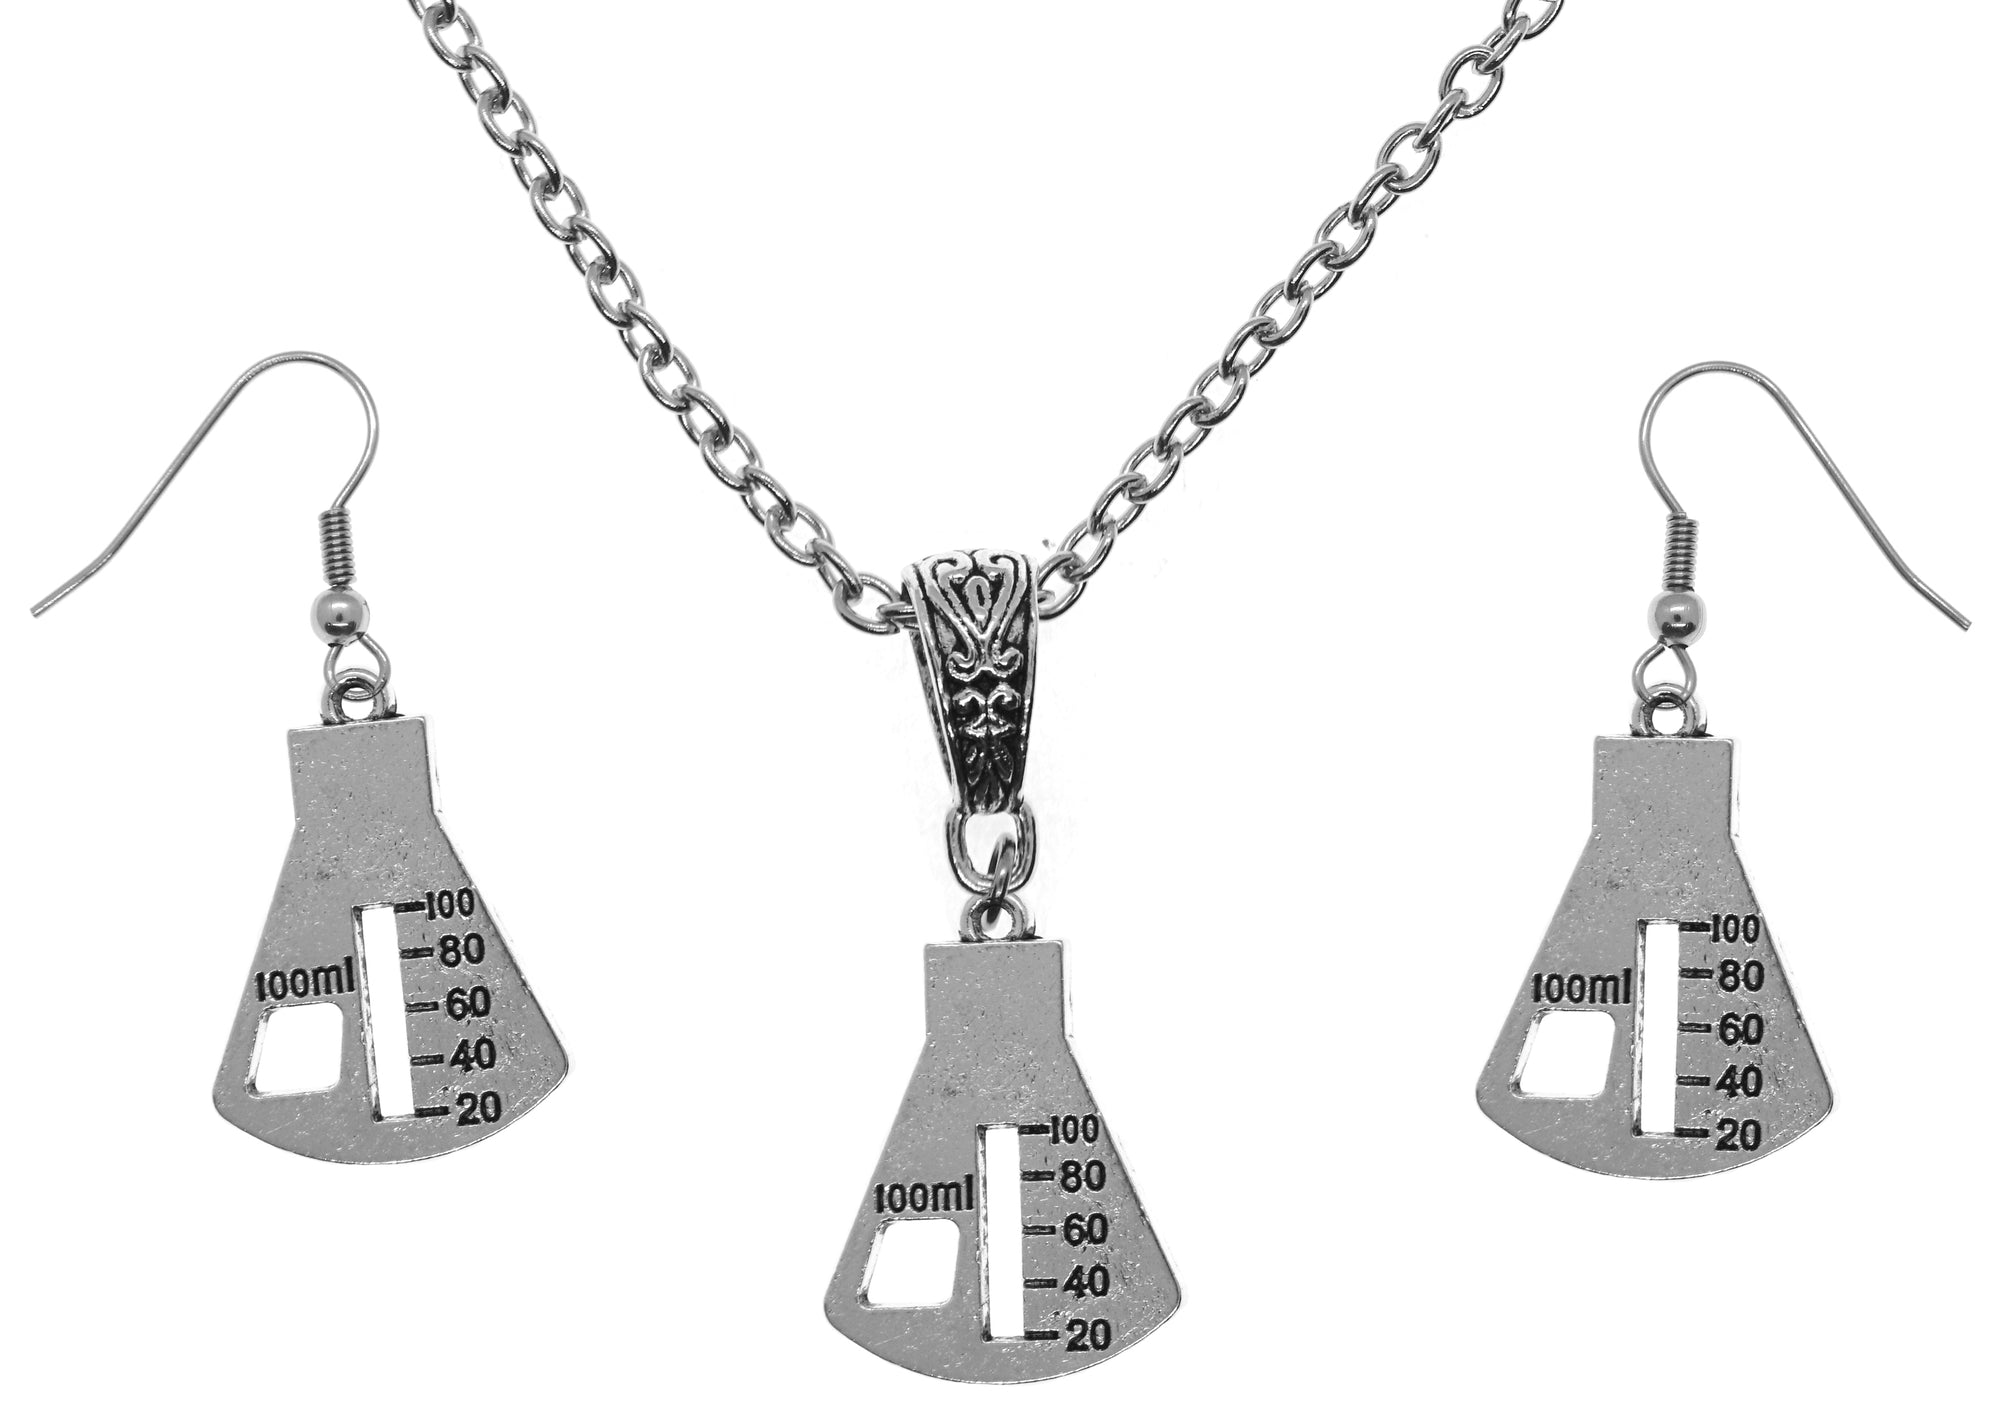 Big Medical Science Lab Beaker Silver Charm Chain Necklace and Earrings Set